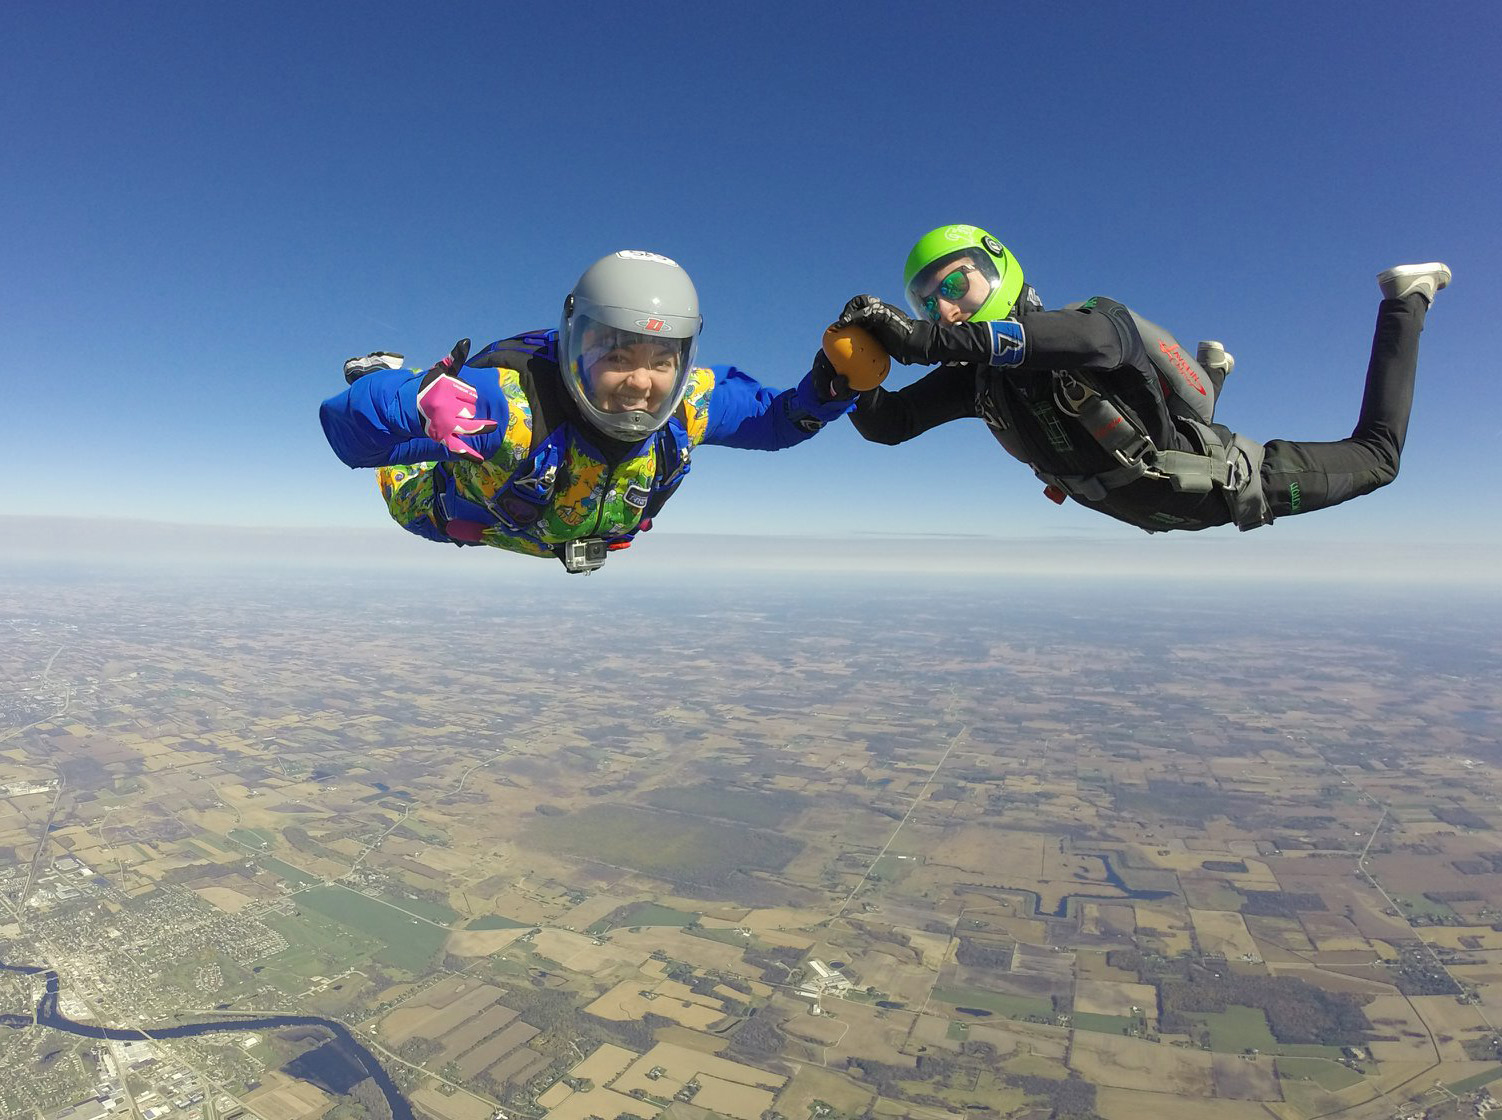 Accelerated Freefall (AFF) training to skydiving solo at Wisconsin Skydiving Center near Milwaukee